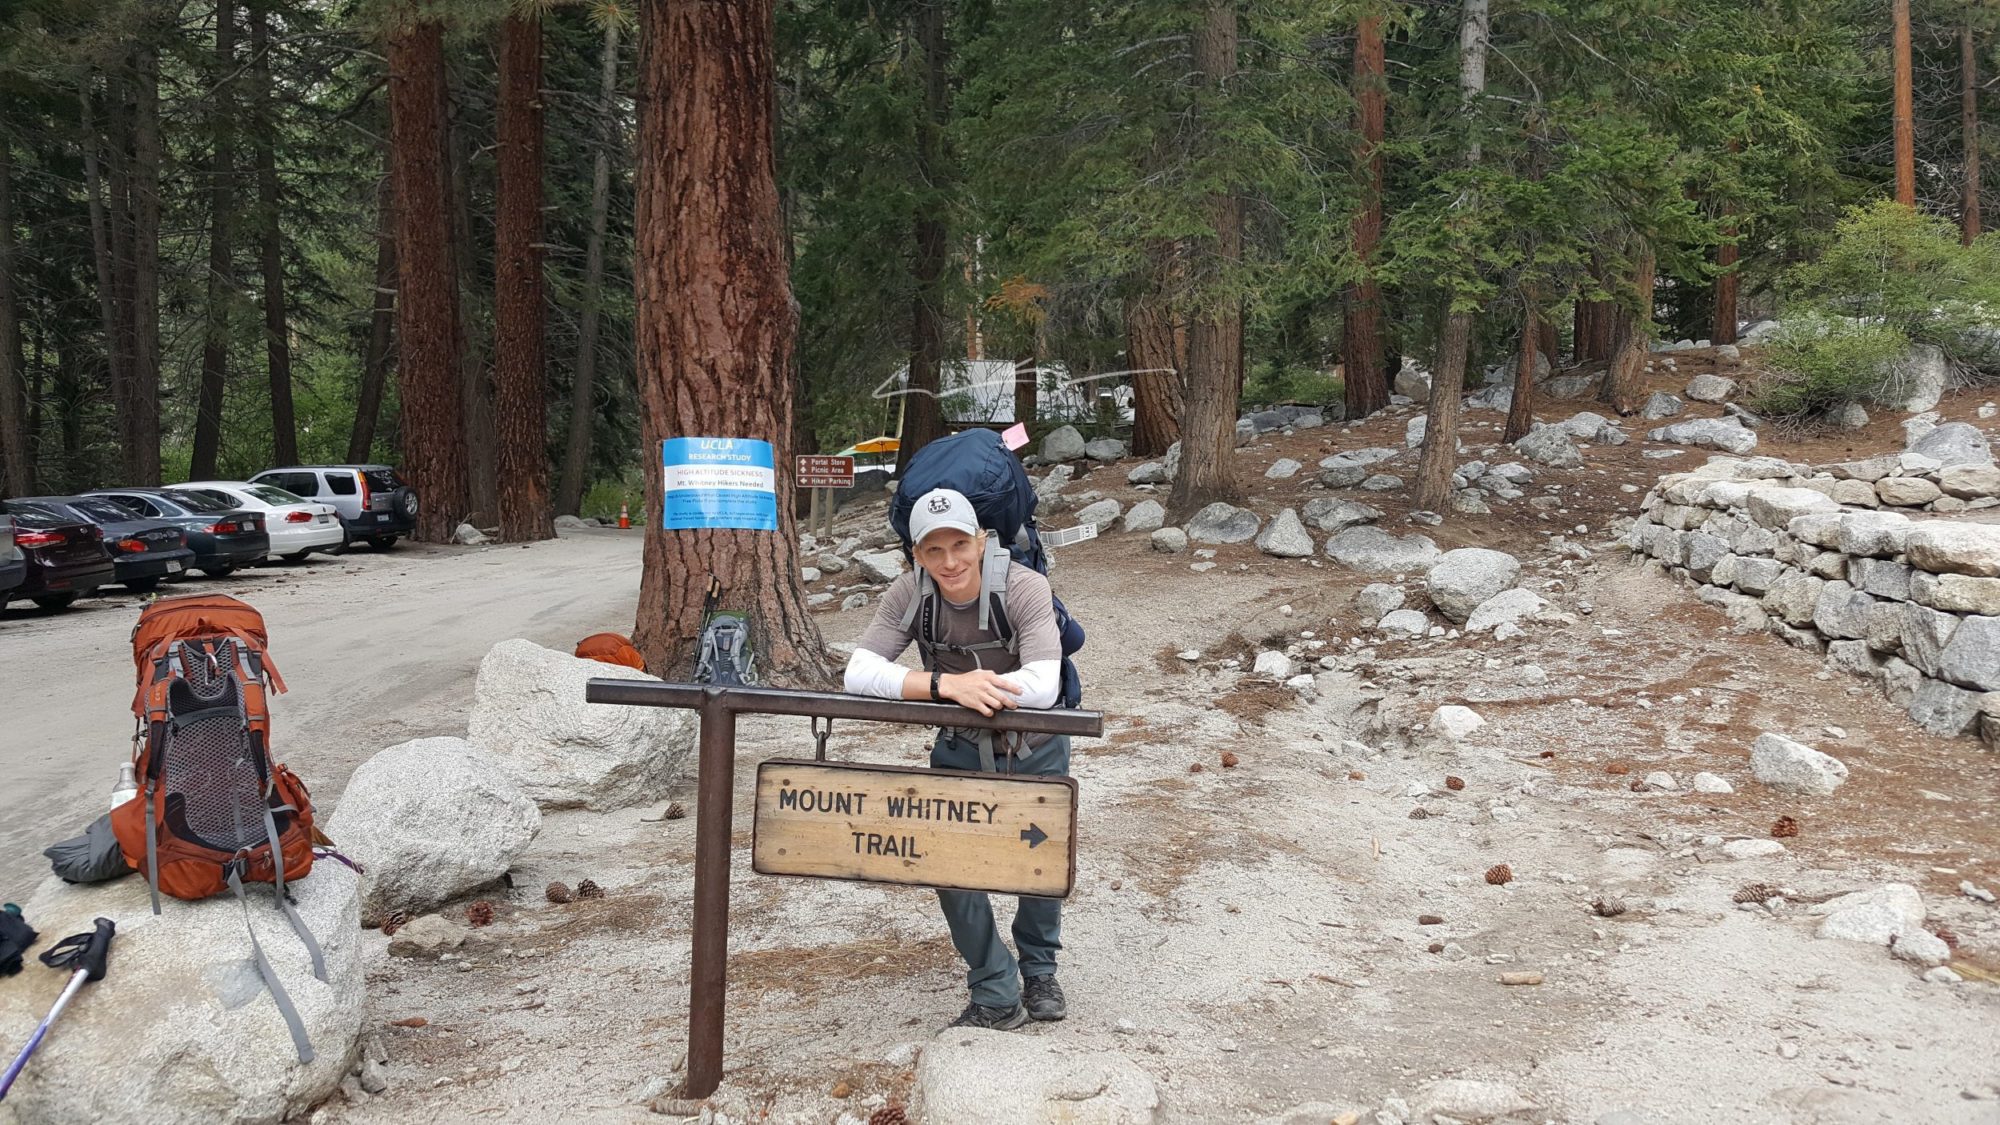 waterboy and the mount whitney trail sign